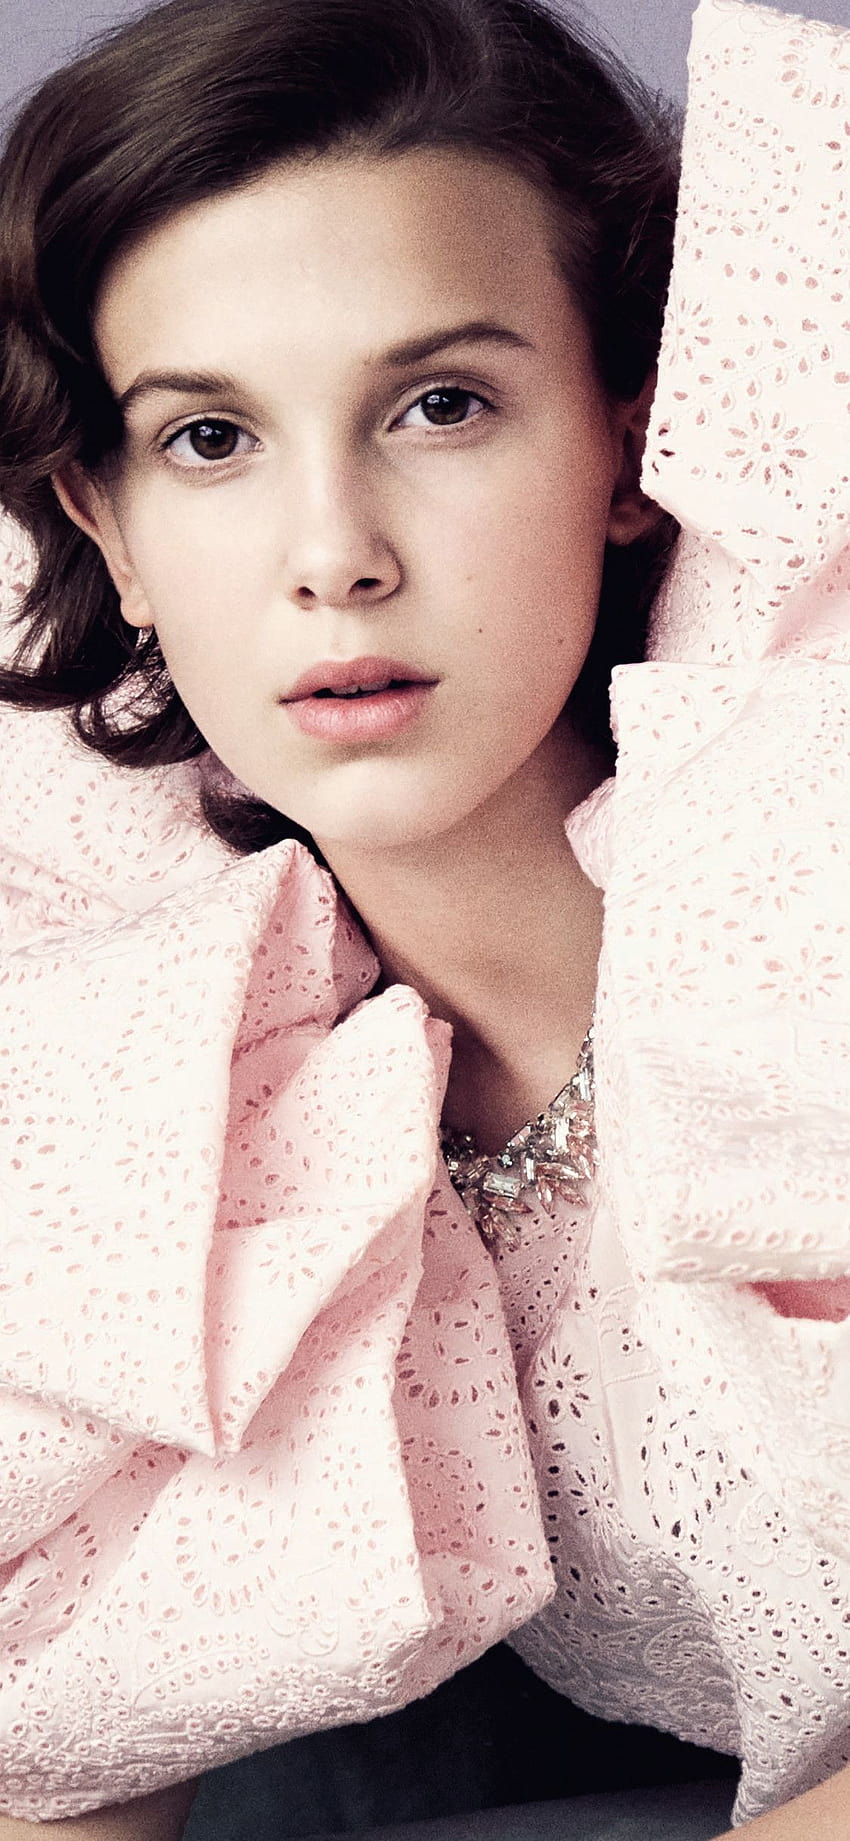 1125x2436 Millie Bobby Brown Vogue 2018 Iphone XS, Iphone 10, Iphone, Millie Bobby Brown iPhone HD-Handy-Hintergrundbild